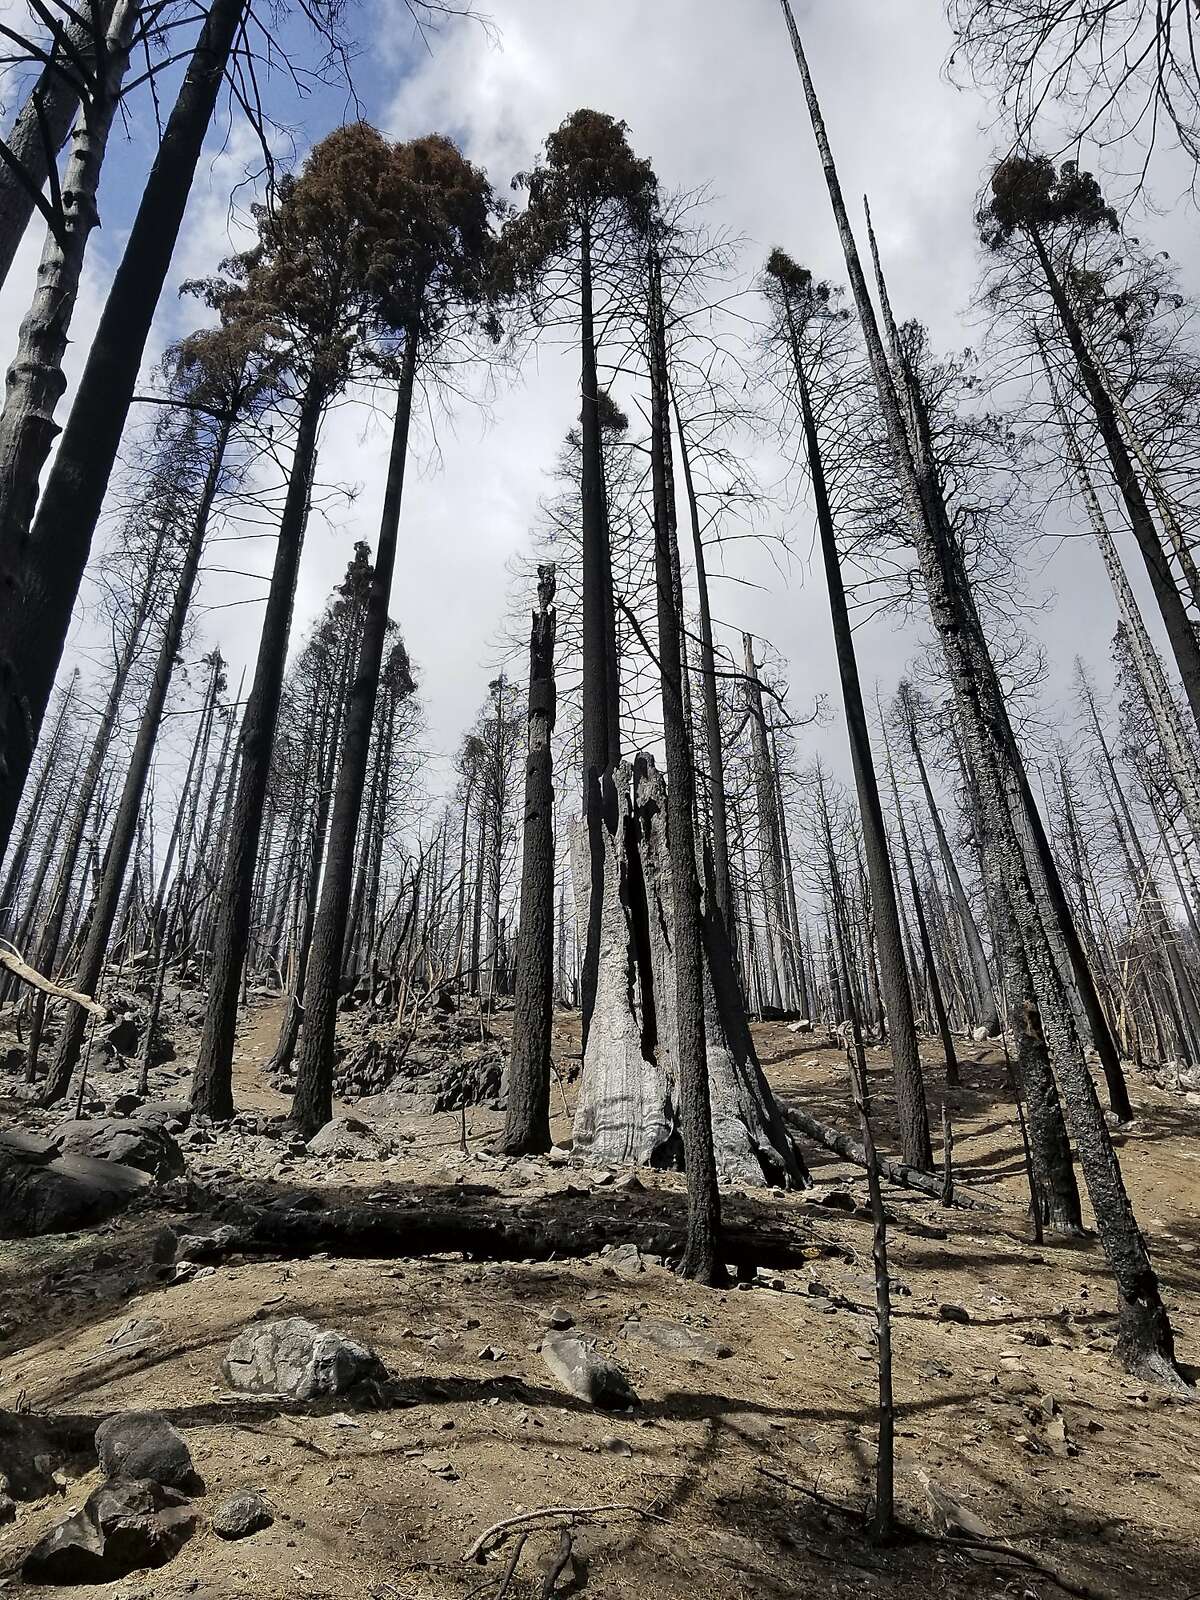 Last year’s Castle Fire took a toll on sequoias in the Board Camp Grove in Sequoia National Park, as seen in April.